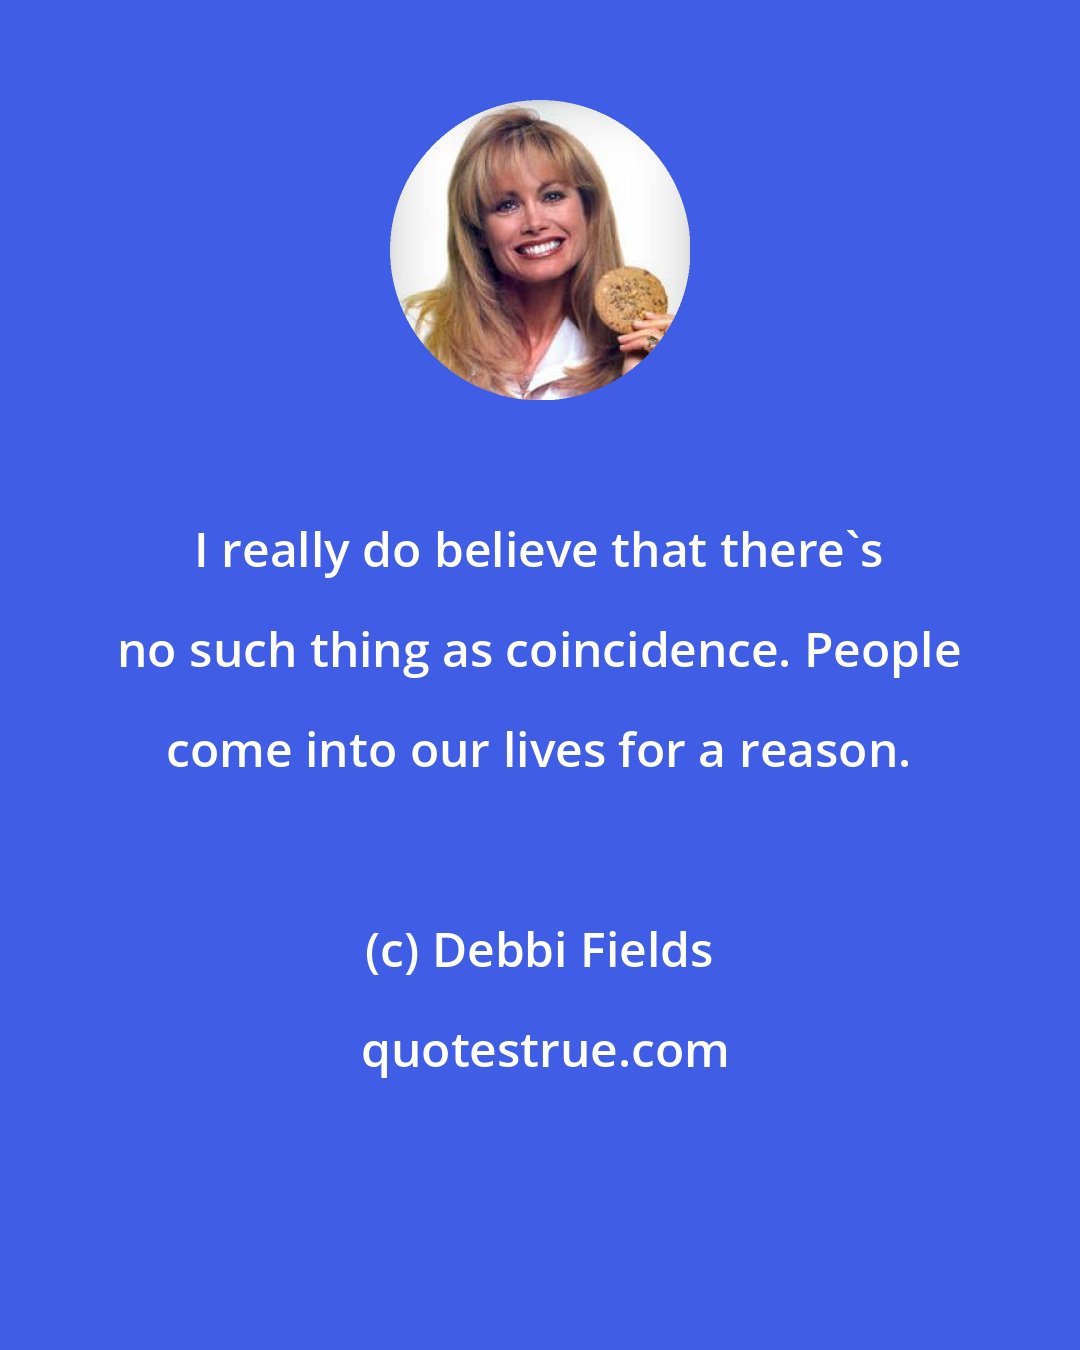 Debbi Fields: I really do believe that there's no such thing as coincidence. People come into our lives for a reason.